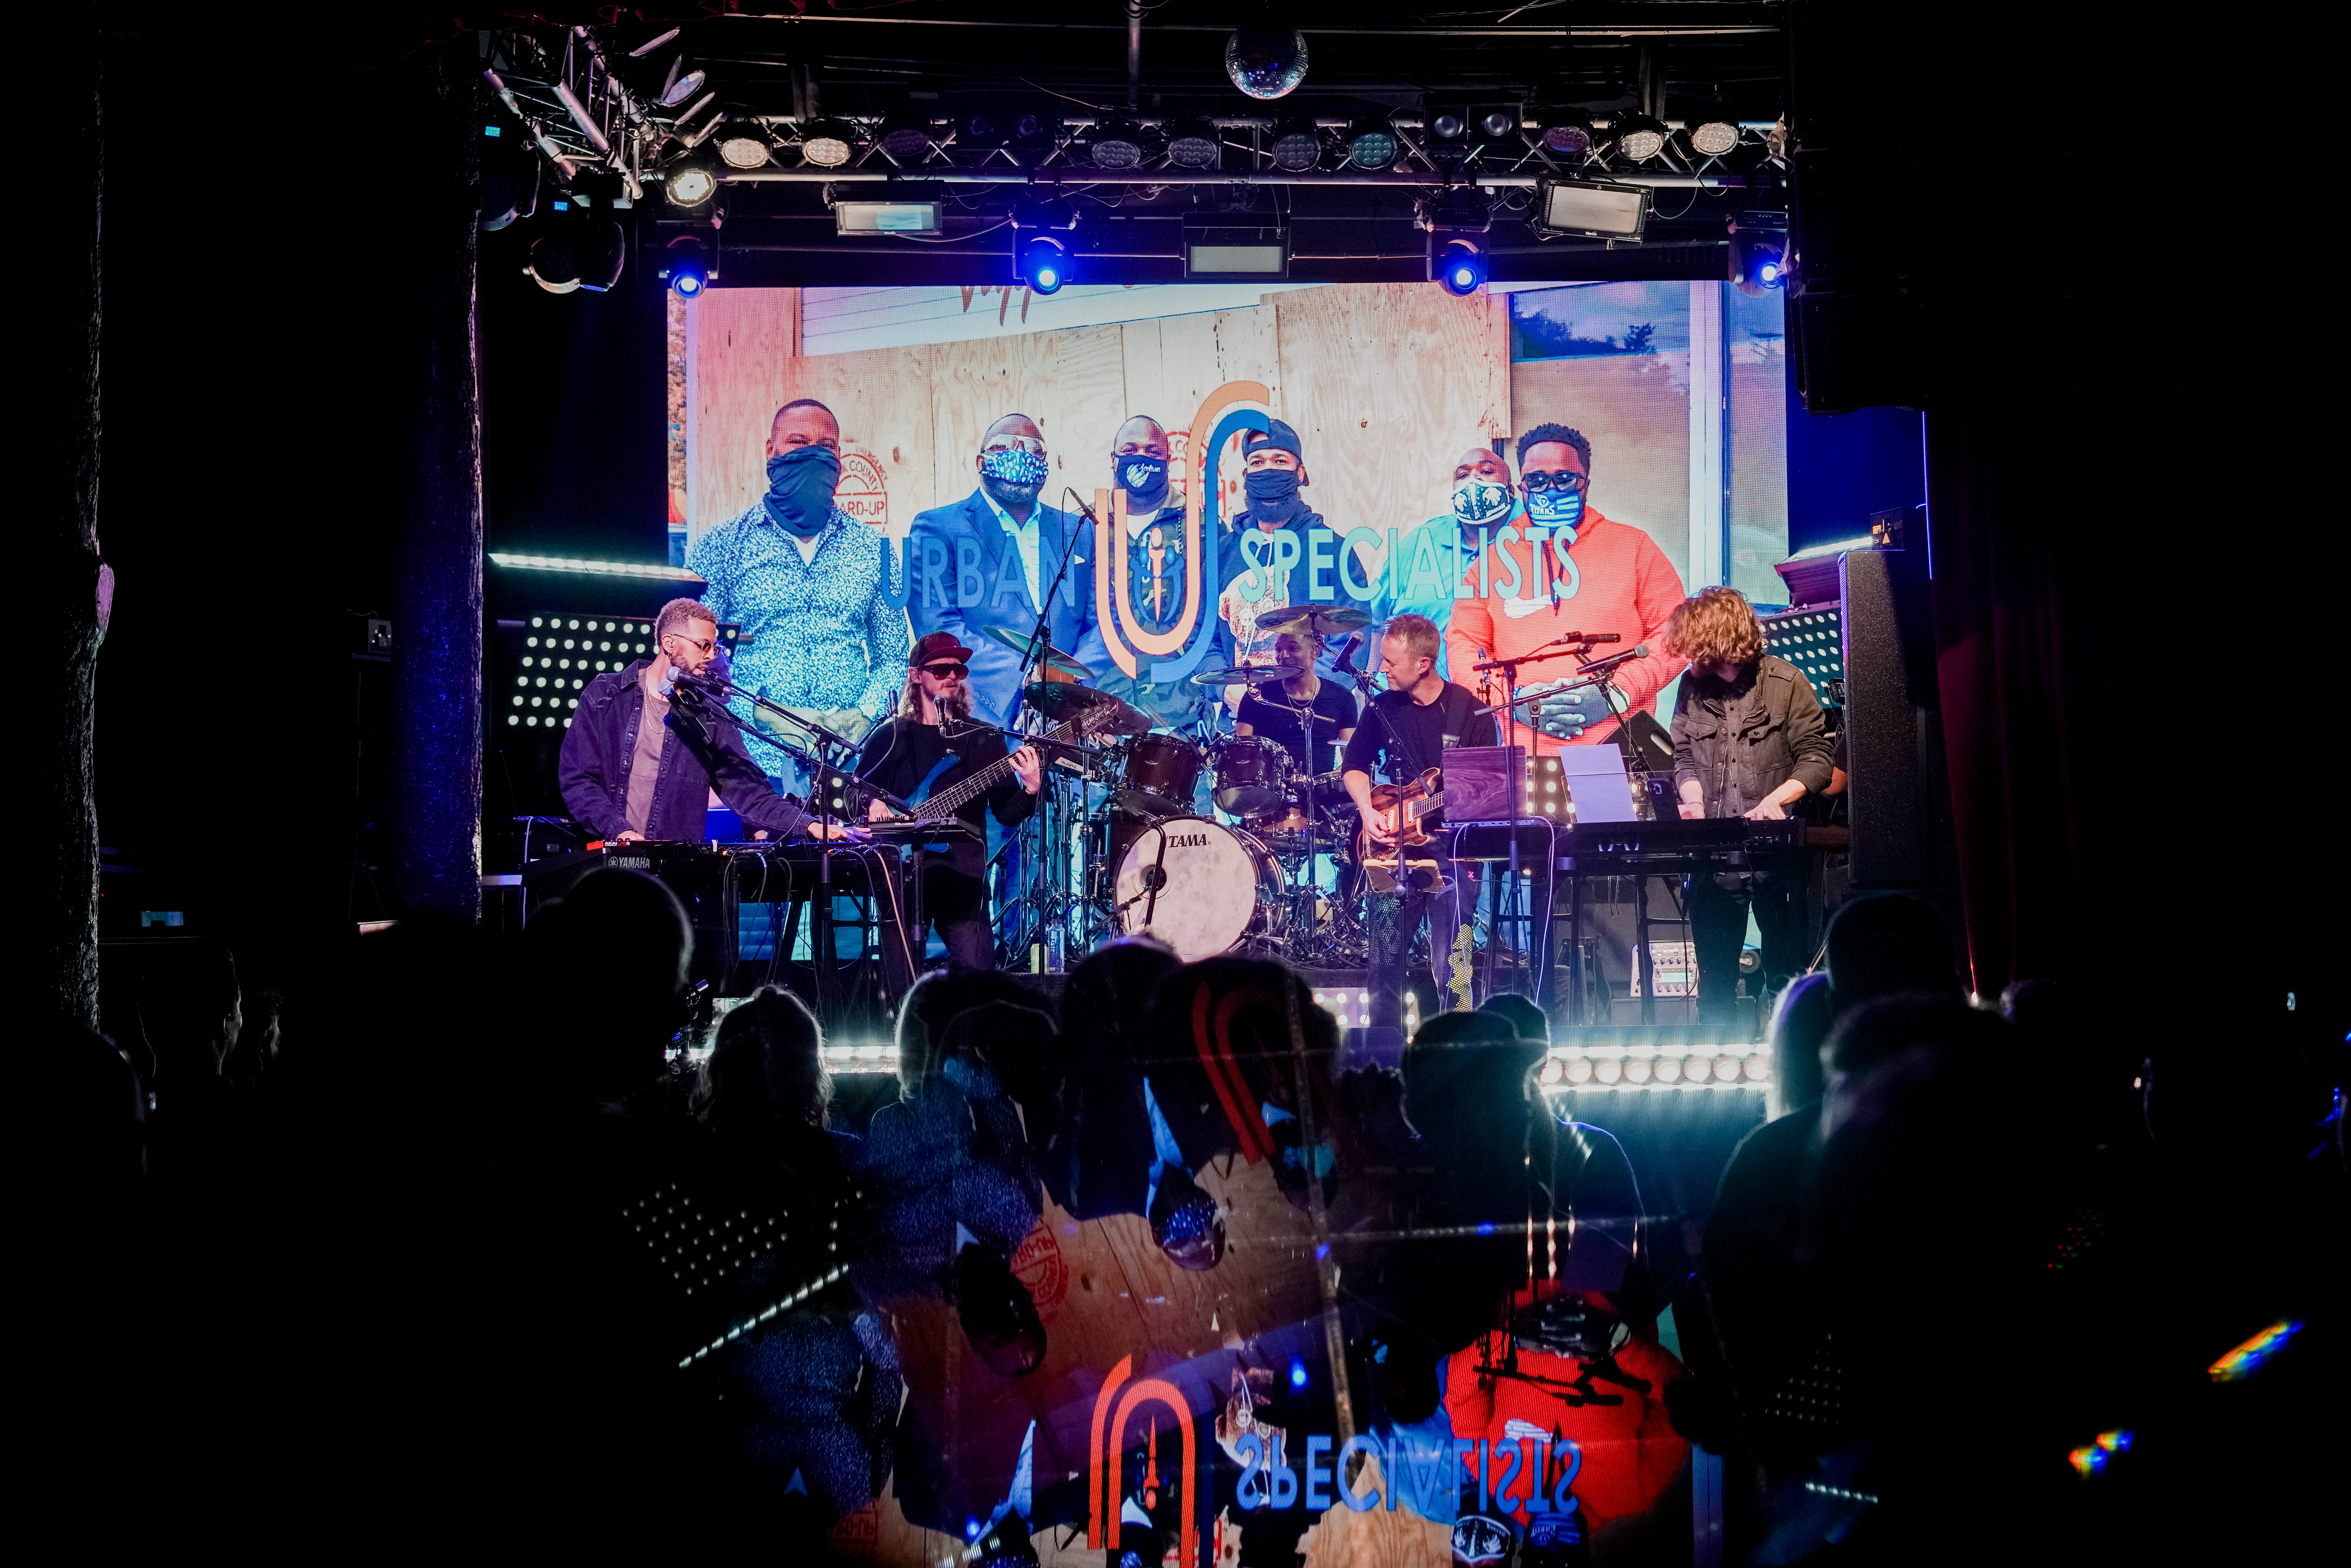 A full band on stage with a projection screen showing a photo of a group of people